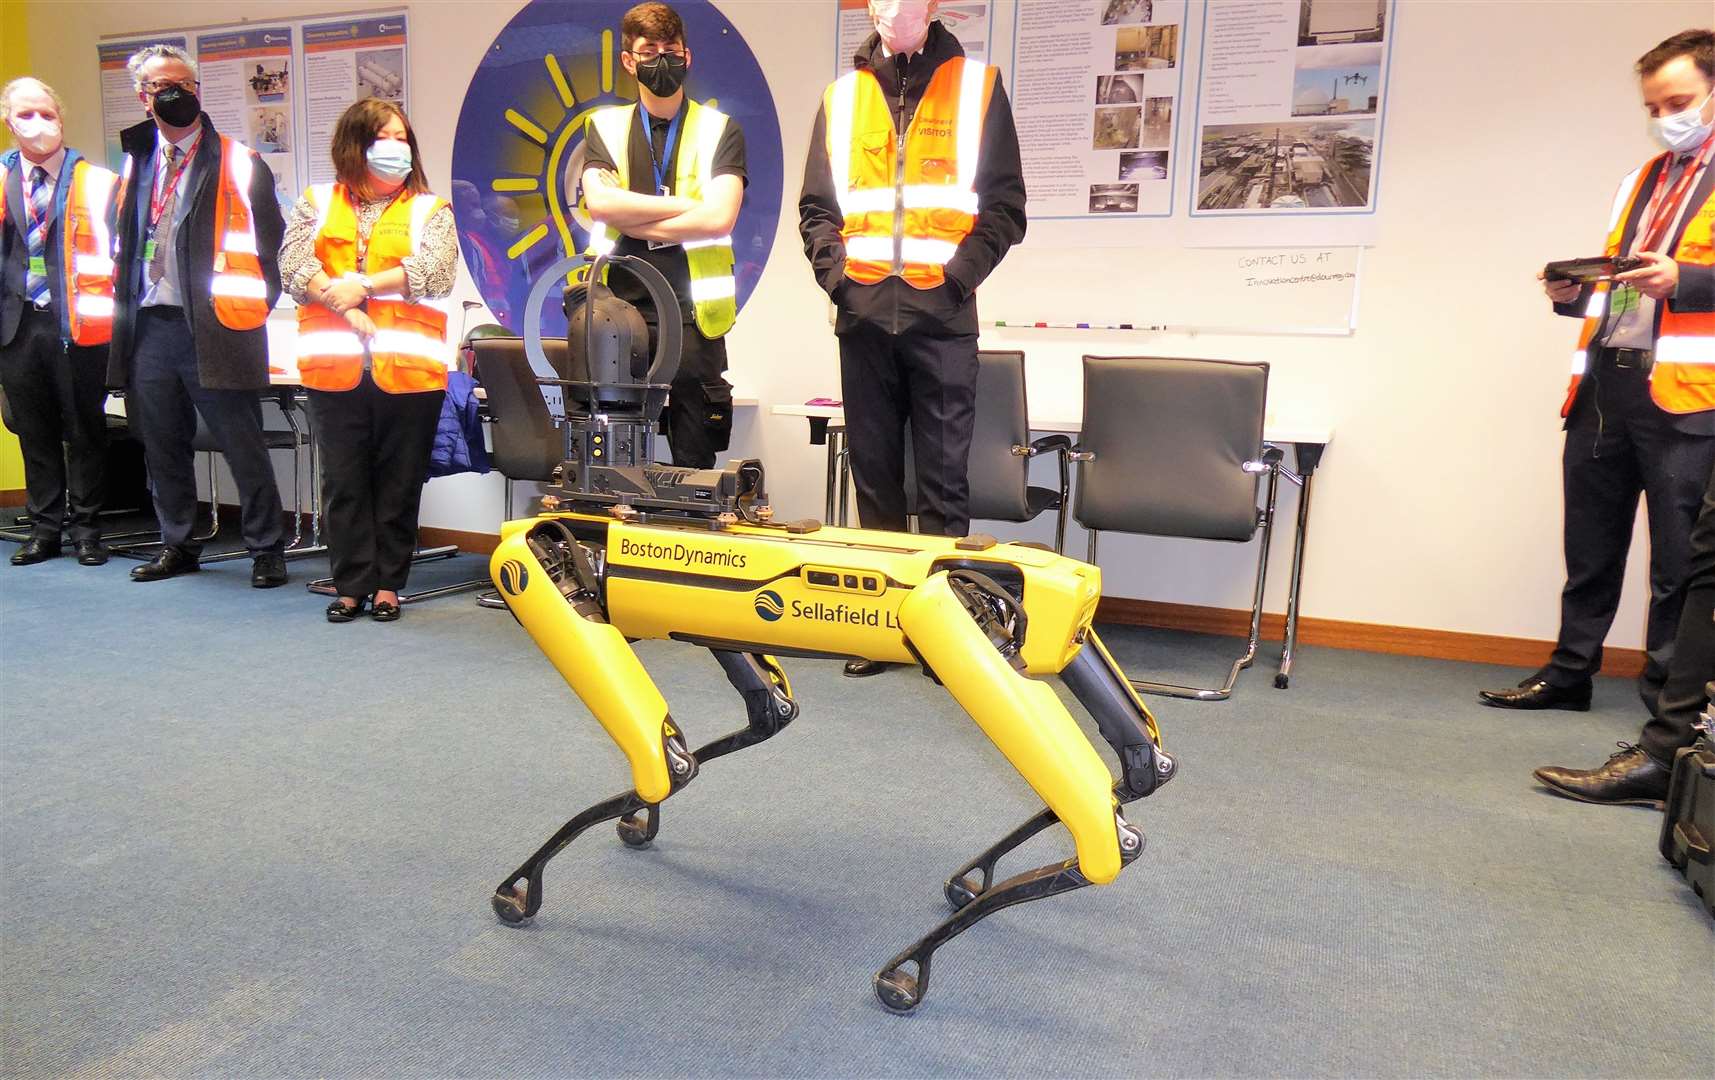 Robbie and his dad also had the chance to see Boston Dynamics's dog-like robot called Spot in action at Dounreay. Picture: DSRL